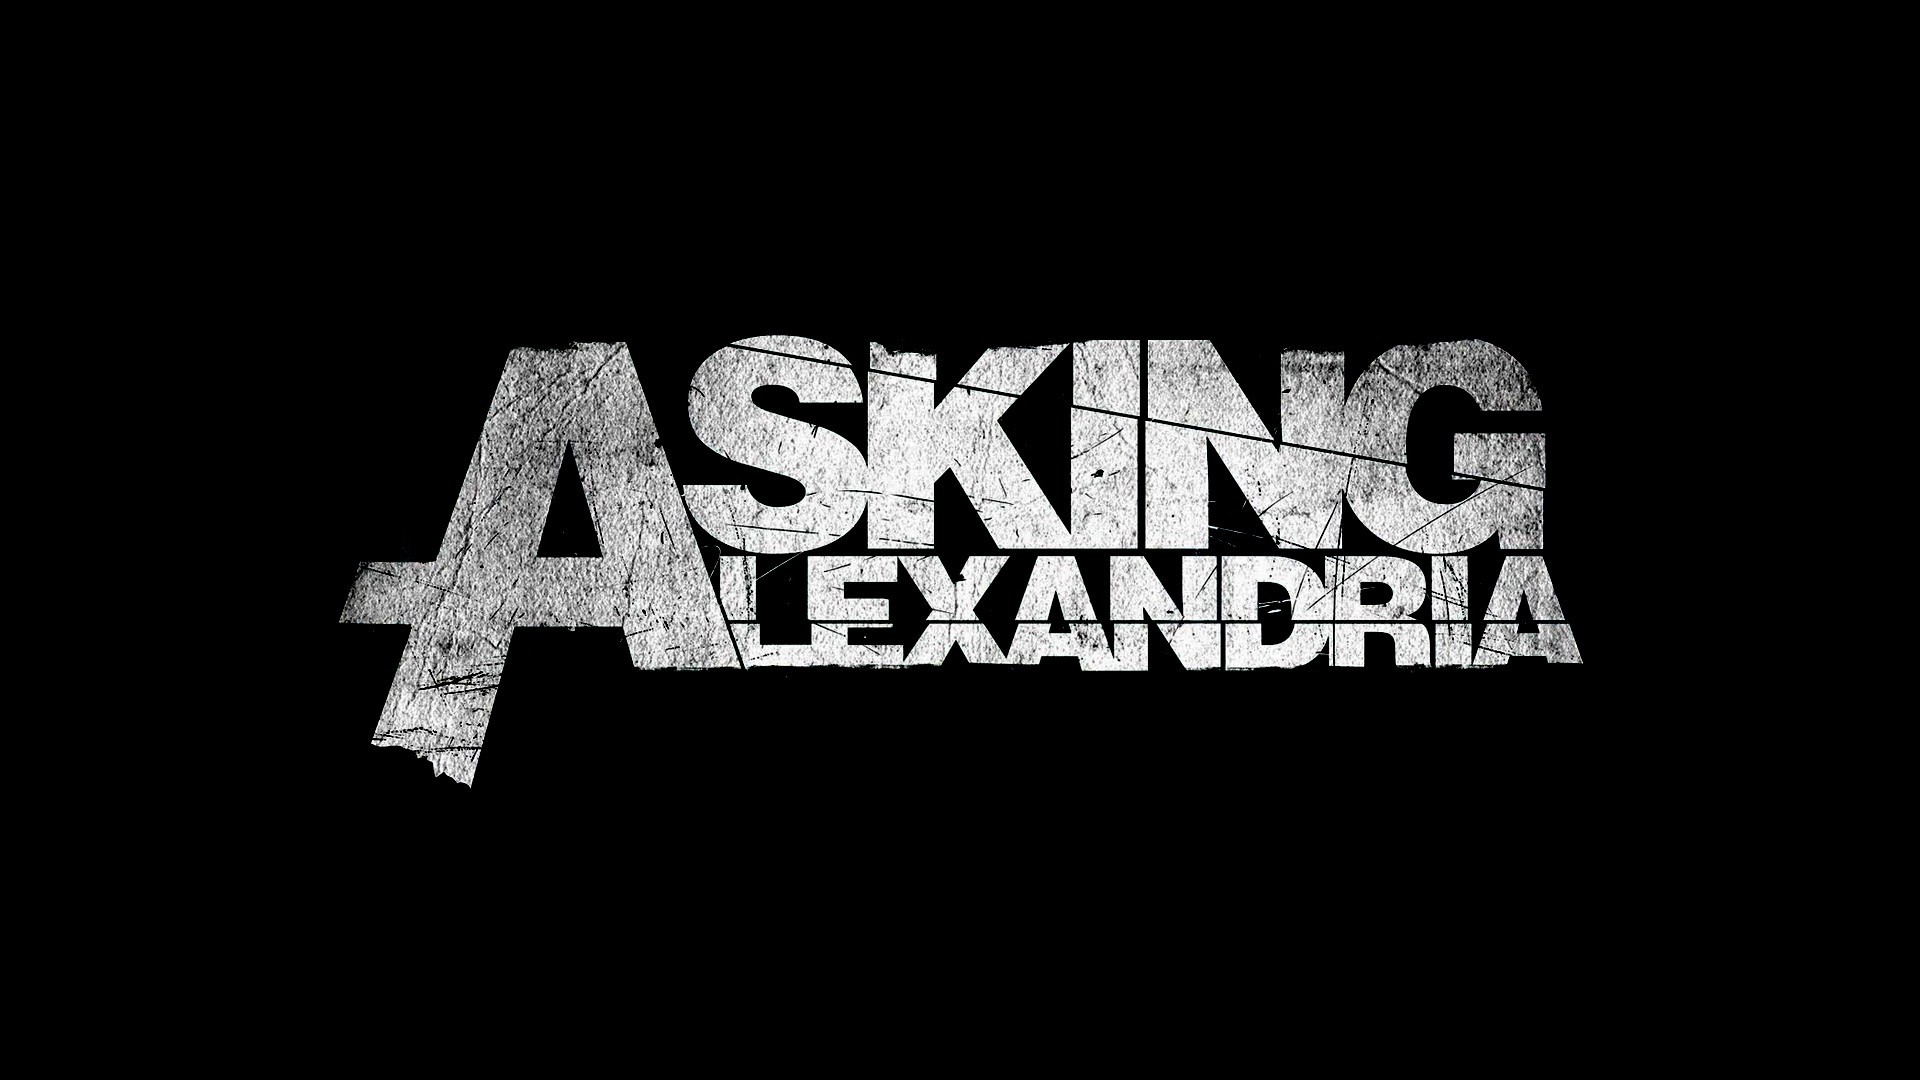 1920x1080 ... best wallpaper; free asking alexandria background hd wallpapers  background photos ...